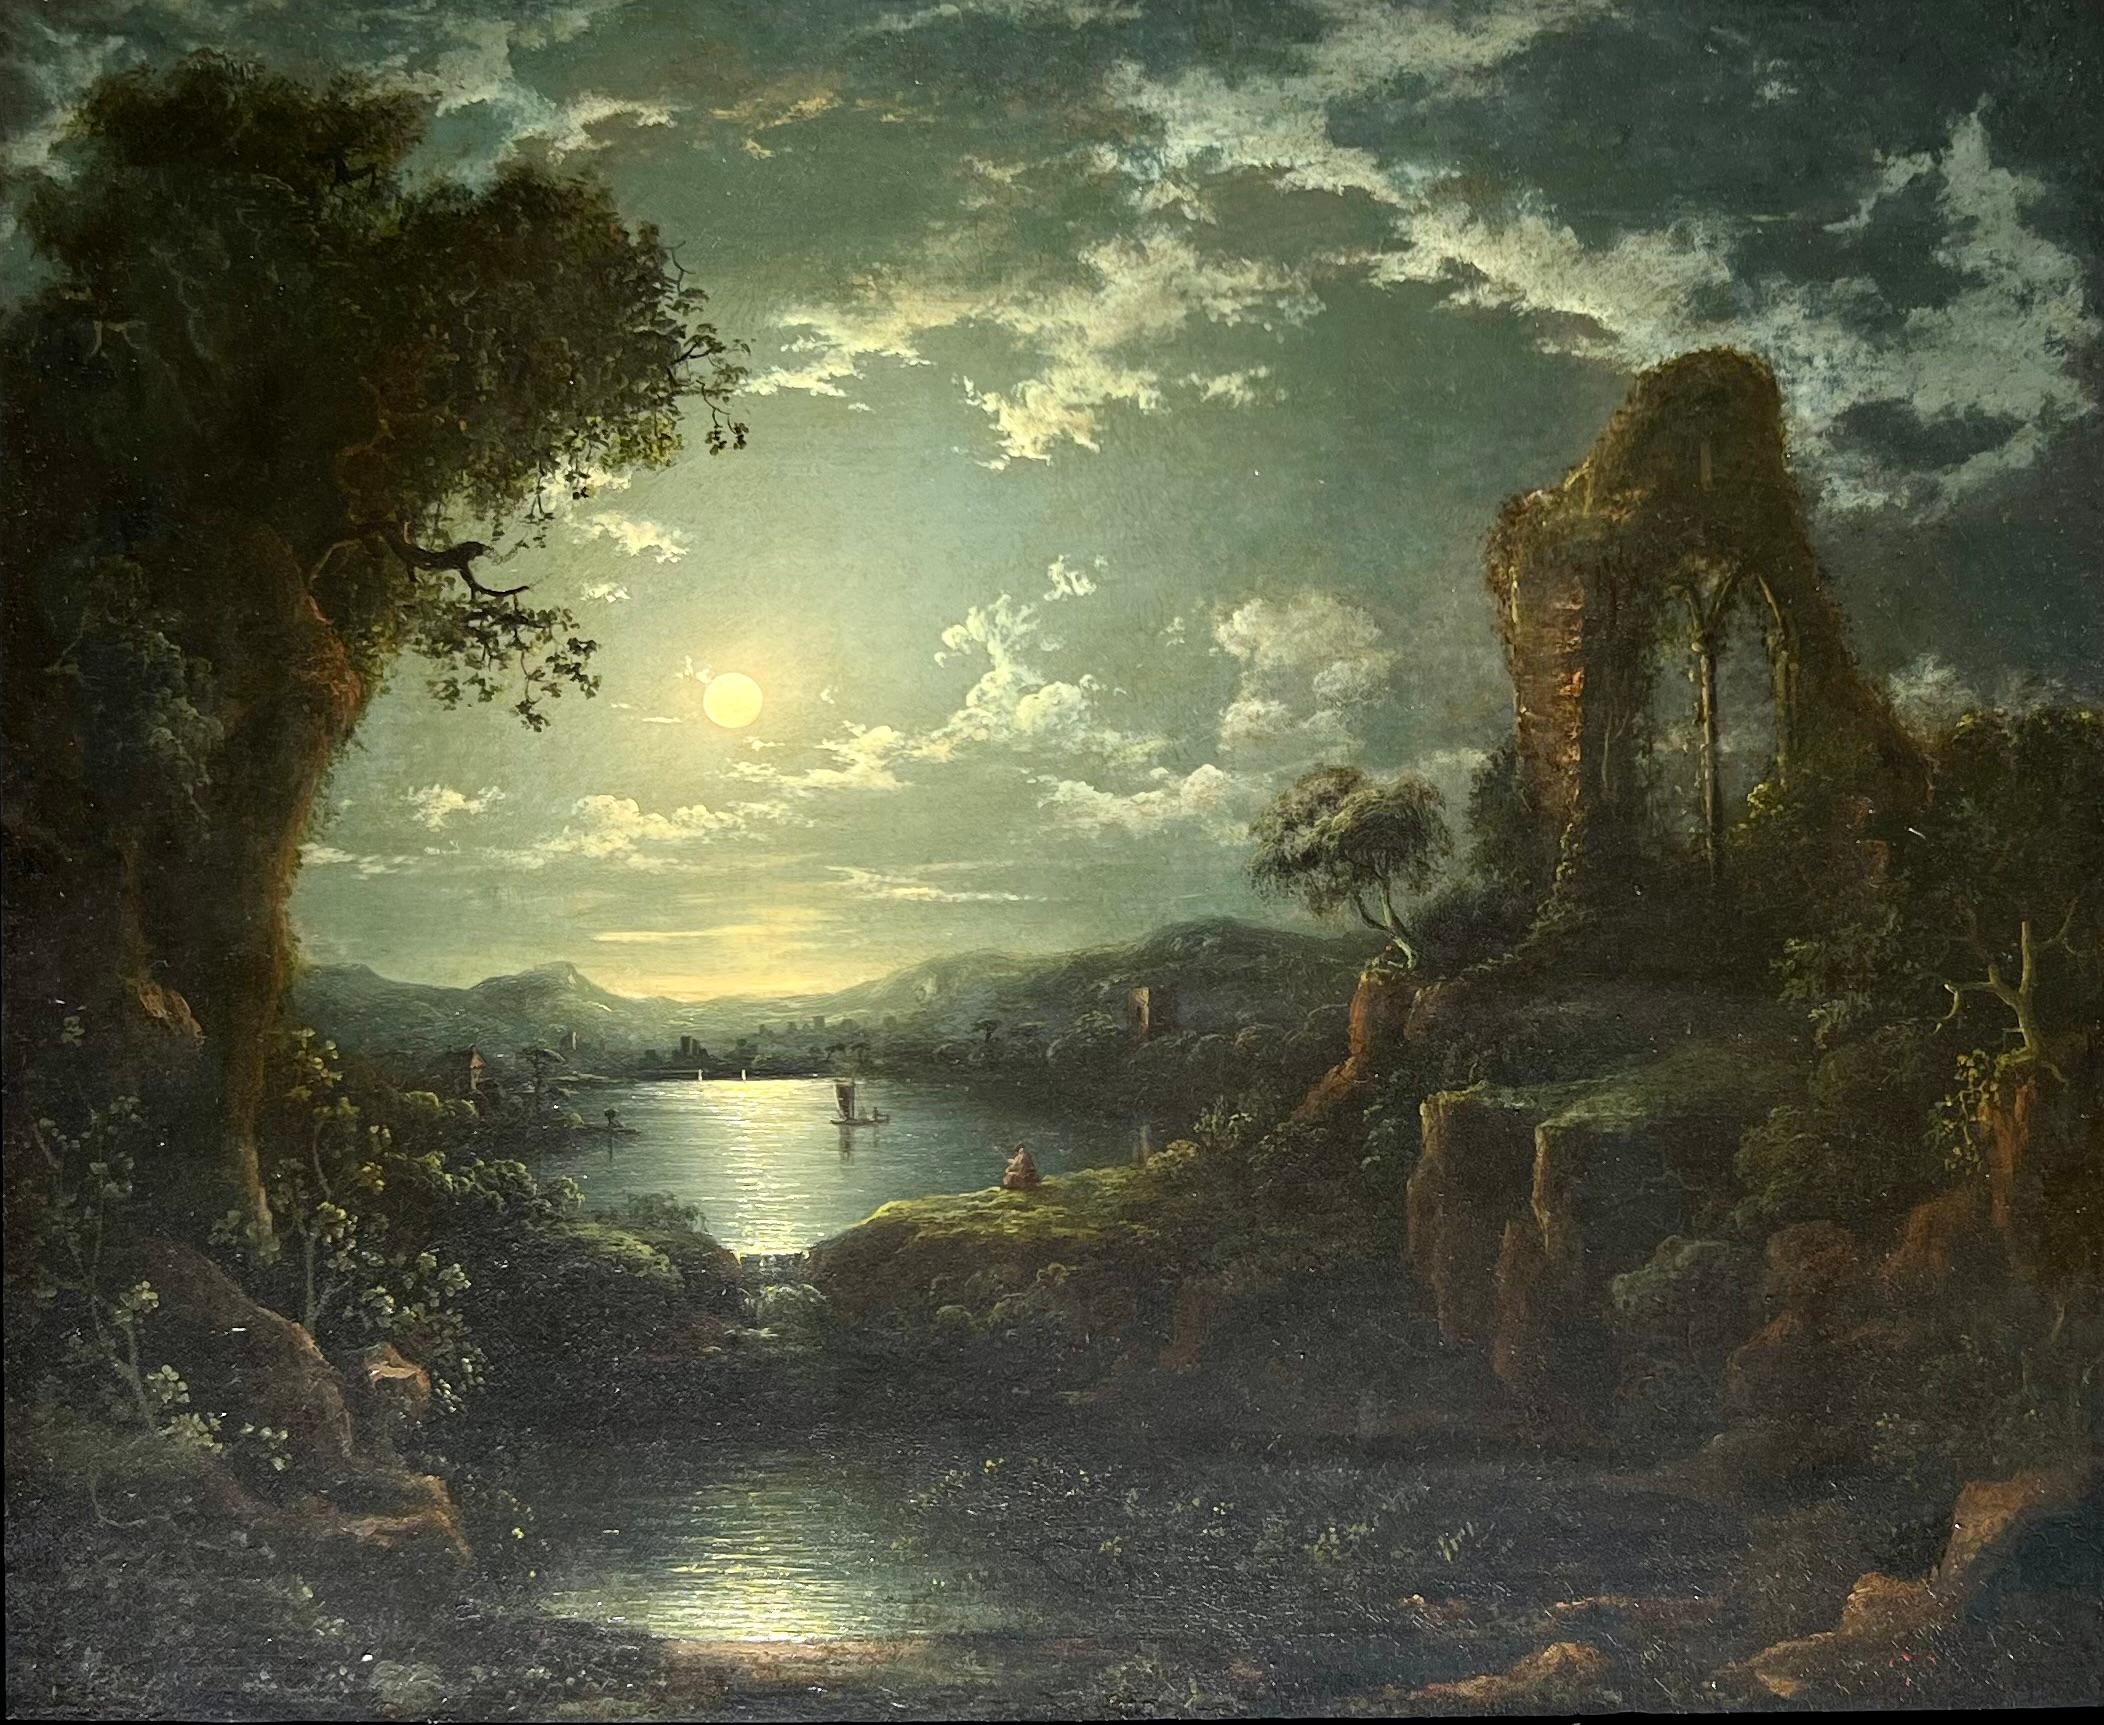 Oil on canvas with remnants of a signature in the lower right. This nocturnal landscape is well done and most probably by one of the Pether family of painters. I would attributed this work to Sebastian Pether as the signature appears to have the